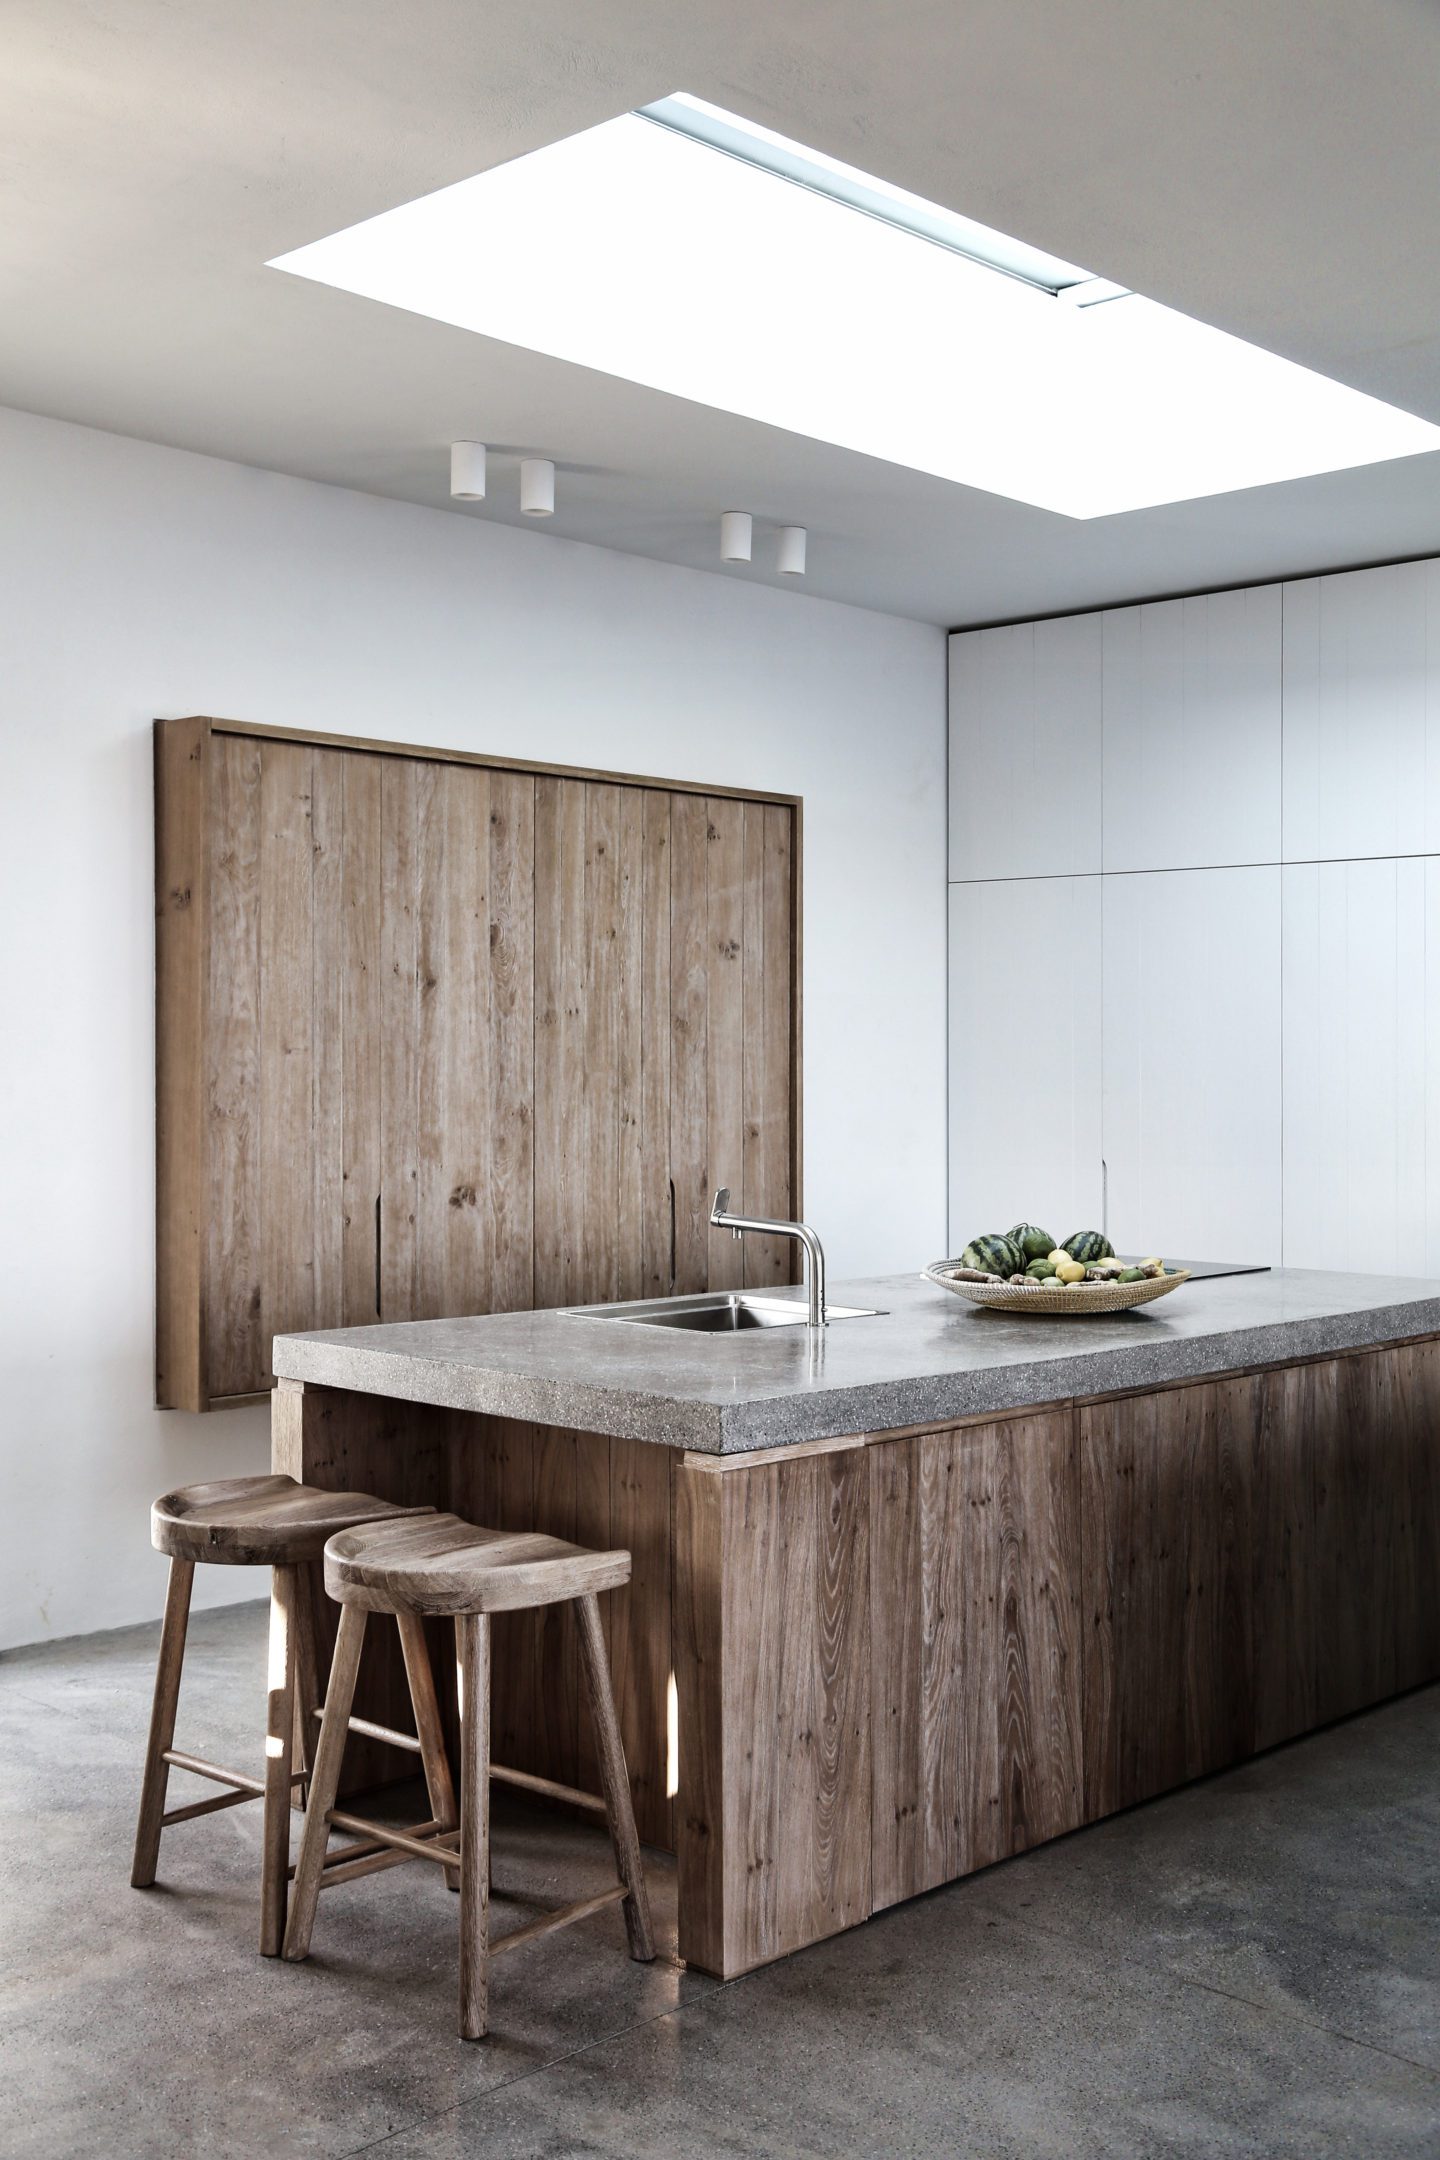 Timber is one of the key materials in this kitchen from Block722